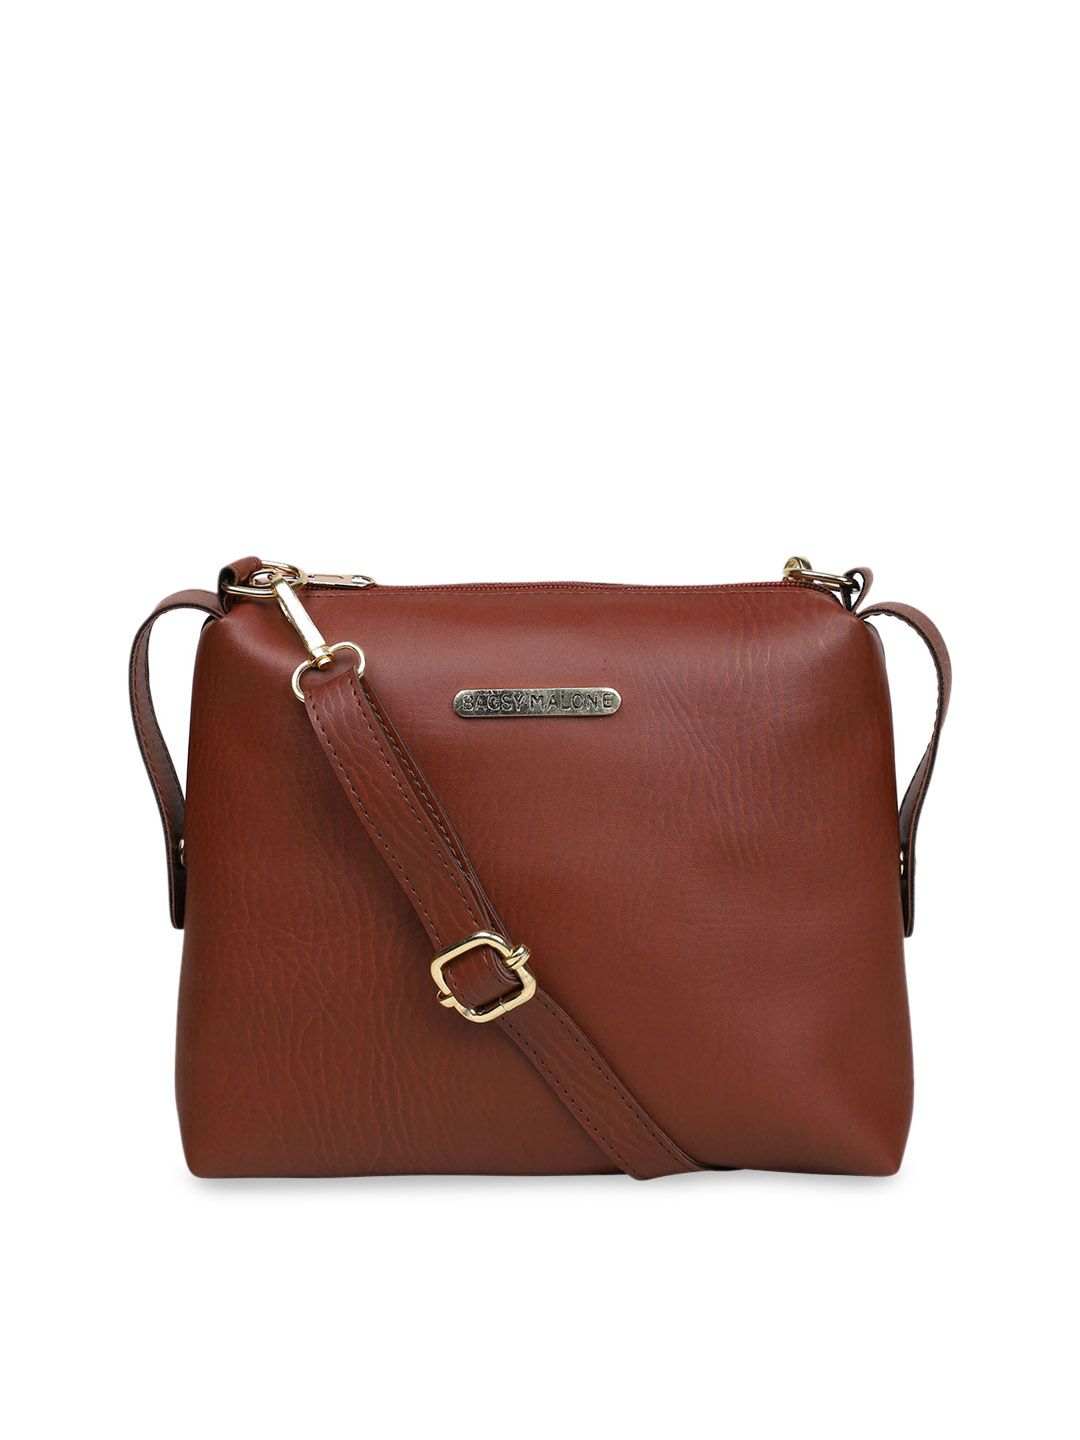 Bagsy Malone Brown Solid Sling Bag Price in India